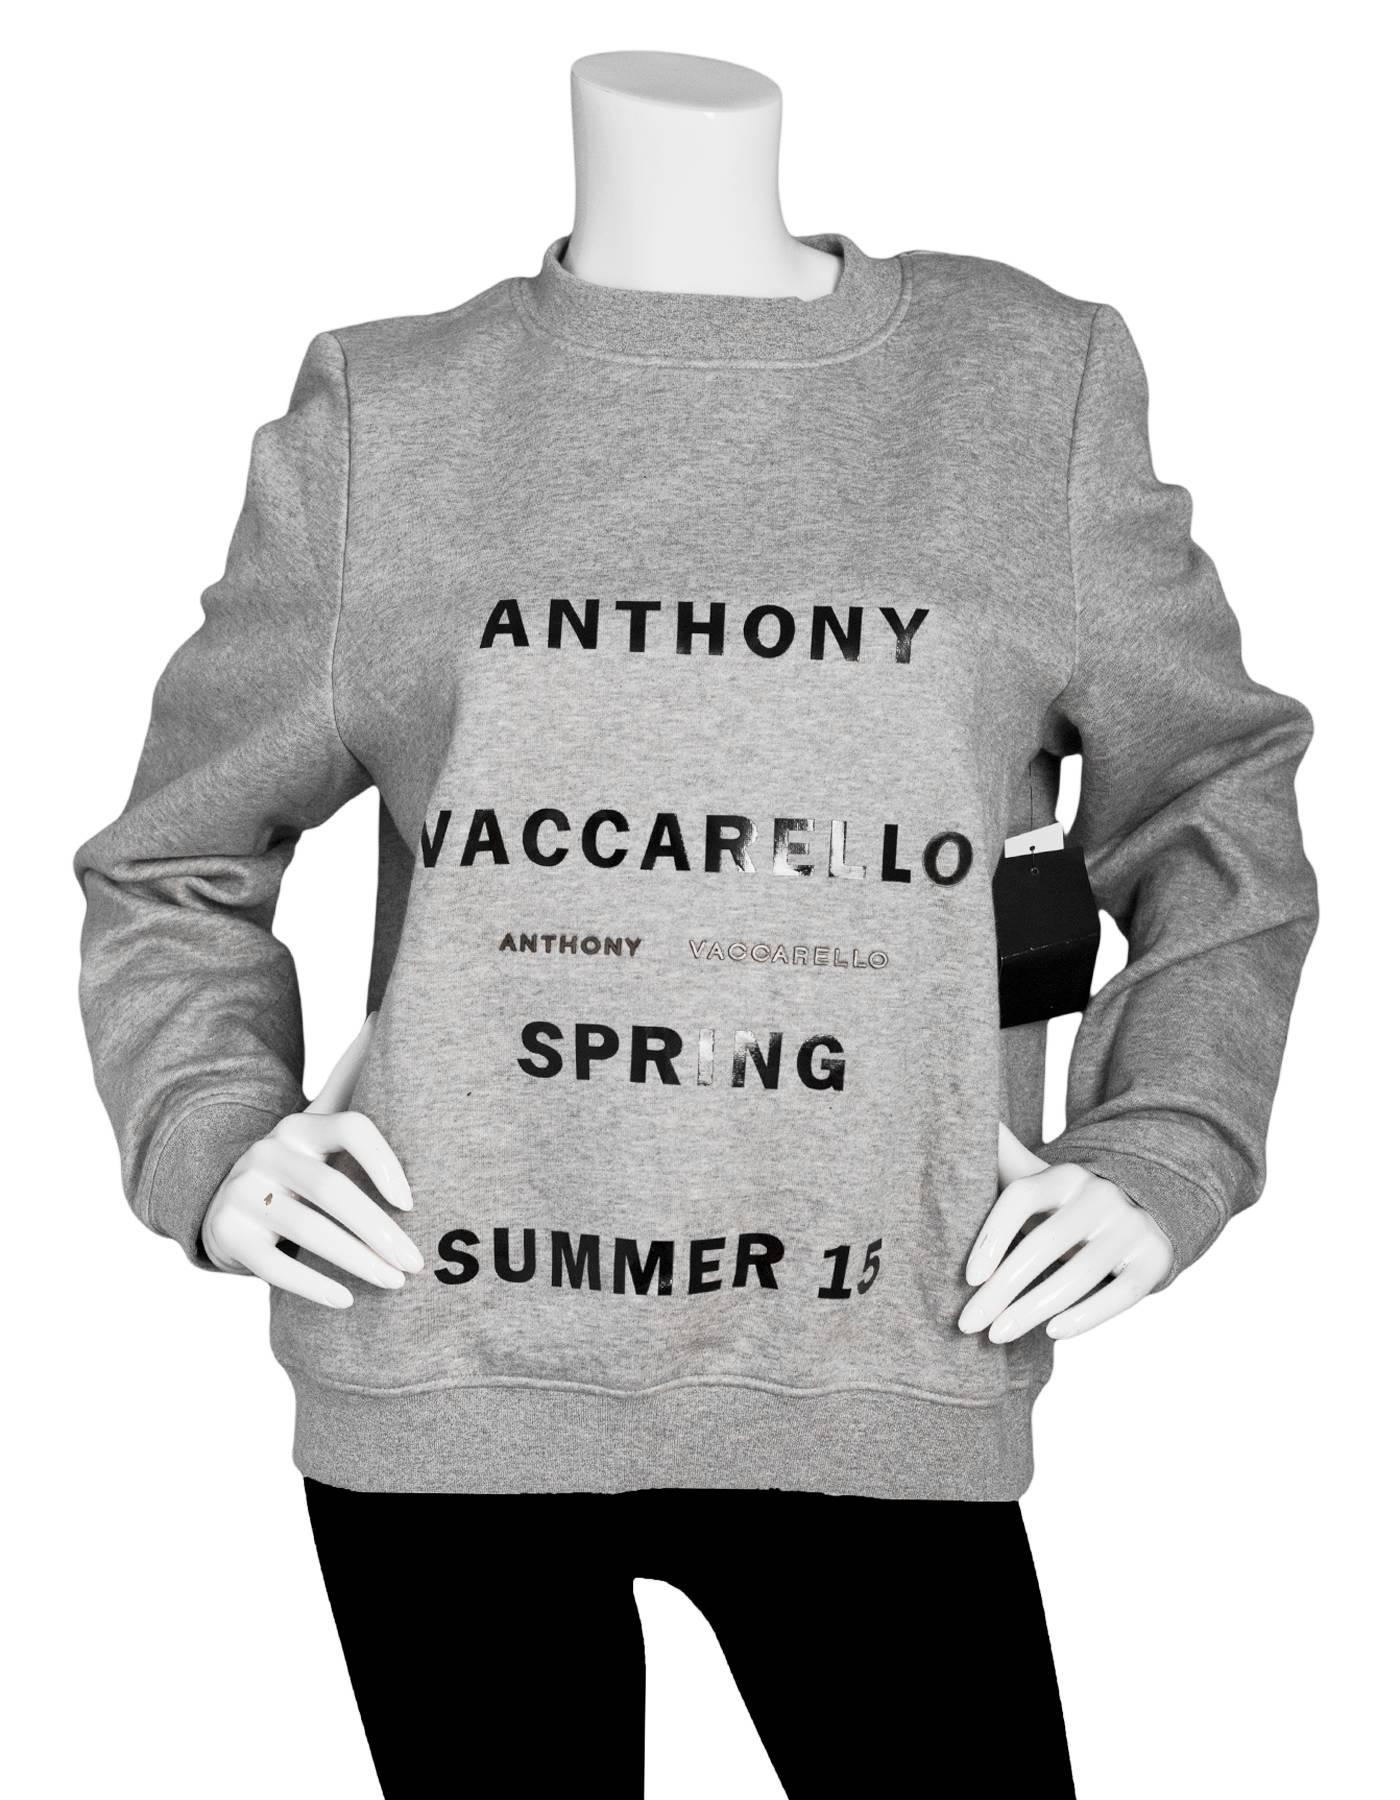 Anthony Vaccarello Grey Spring/Summer '15 Print Sweatshirt Sz FR42 NWT

Made In: France
Color: Grey, black
Composition: 61% cotton, 35% nylon, 2% silk, 2% cashmere
Lining: None
Closure/Opening: Pull over
Exterior Pockets: None
Interior Pockets: